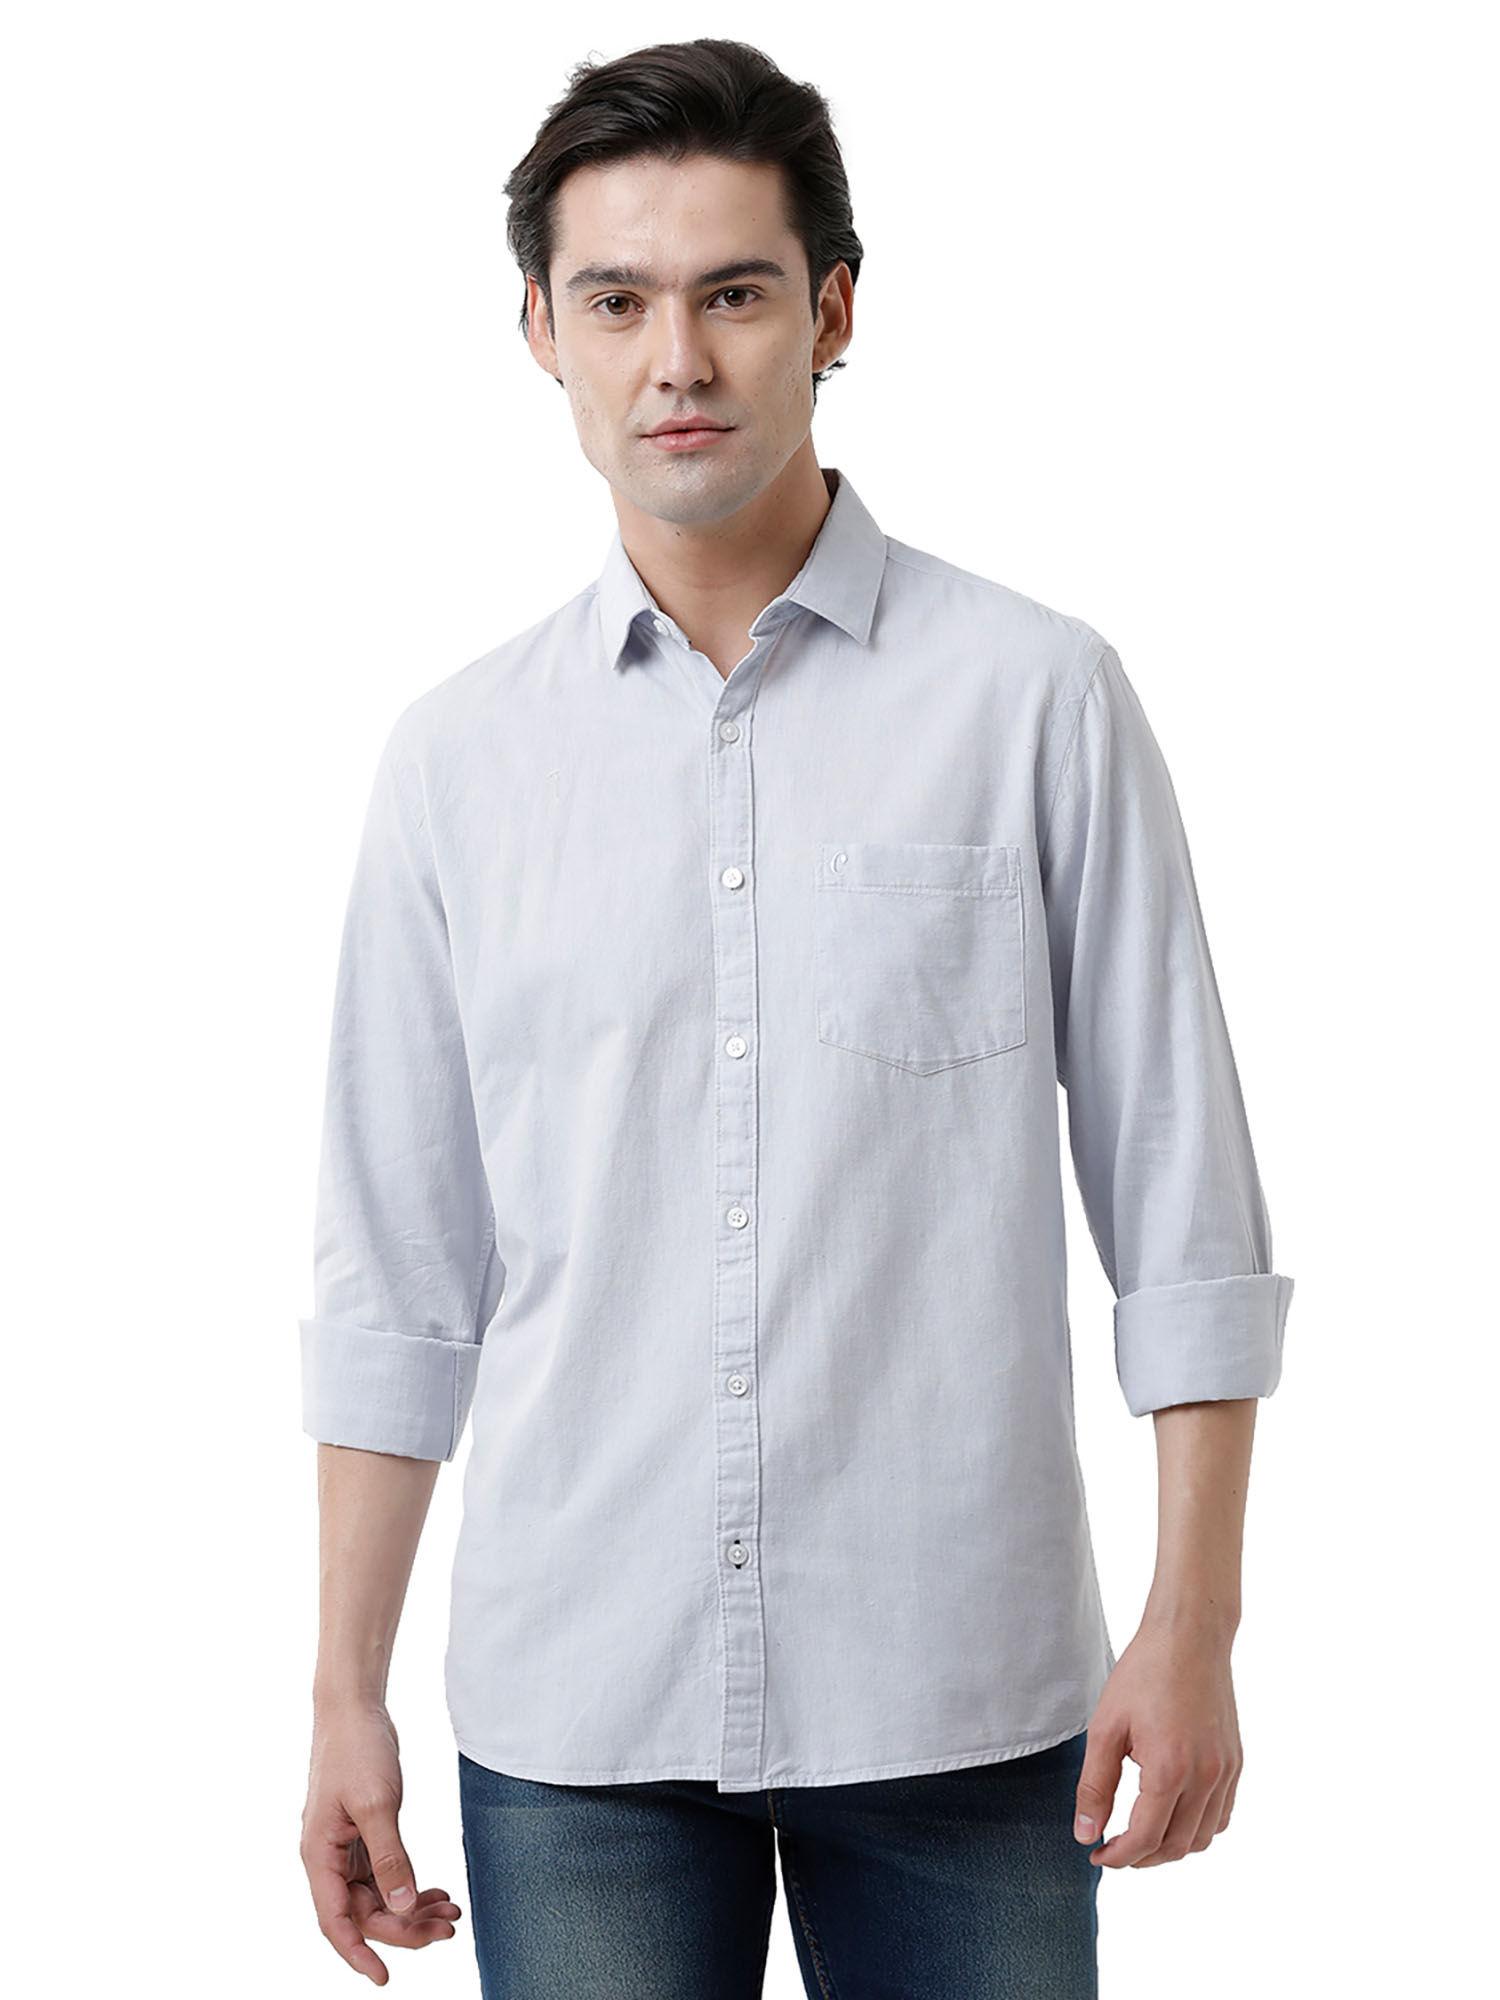 men's-cotton-linen-grey-chambray-slim-fit-full-sleeve-casual-shirt